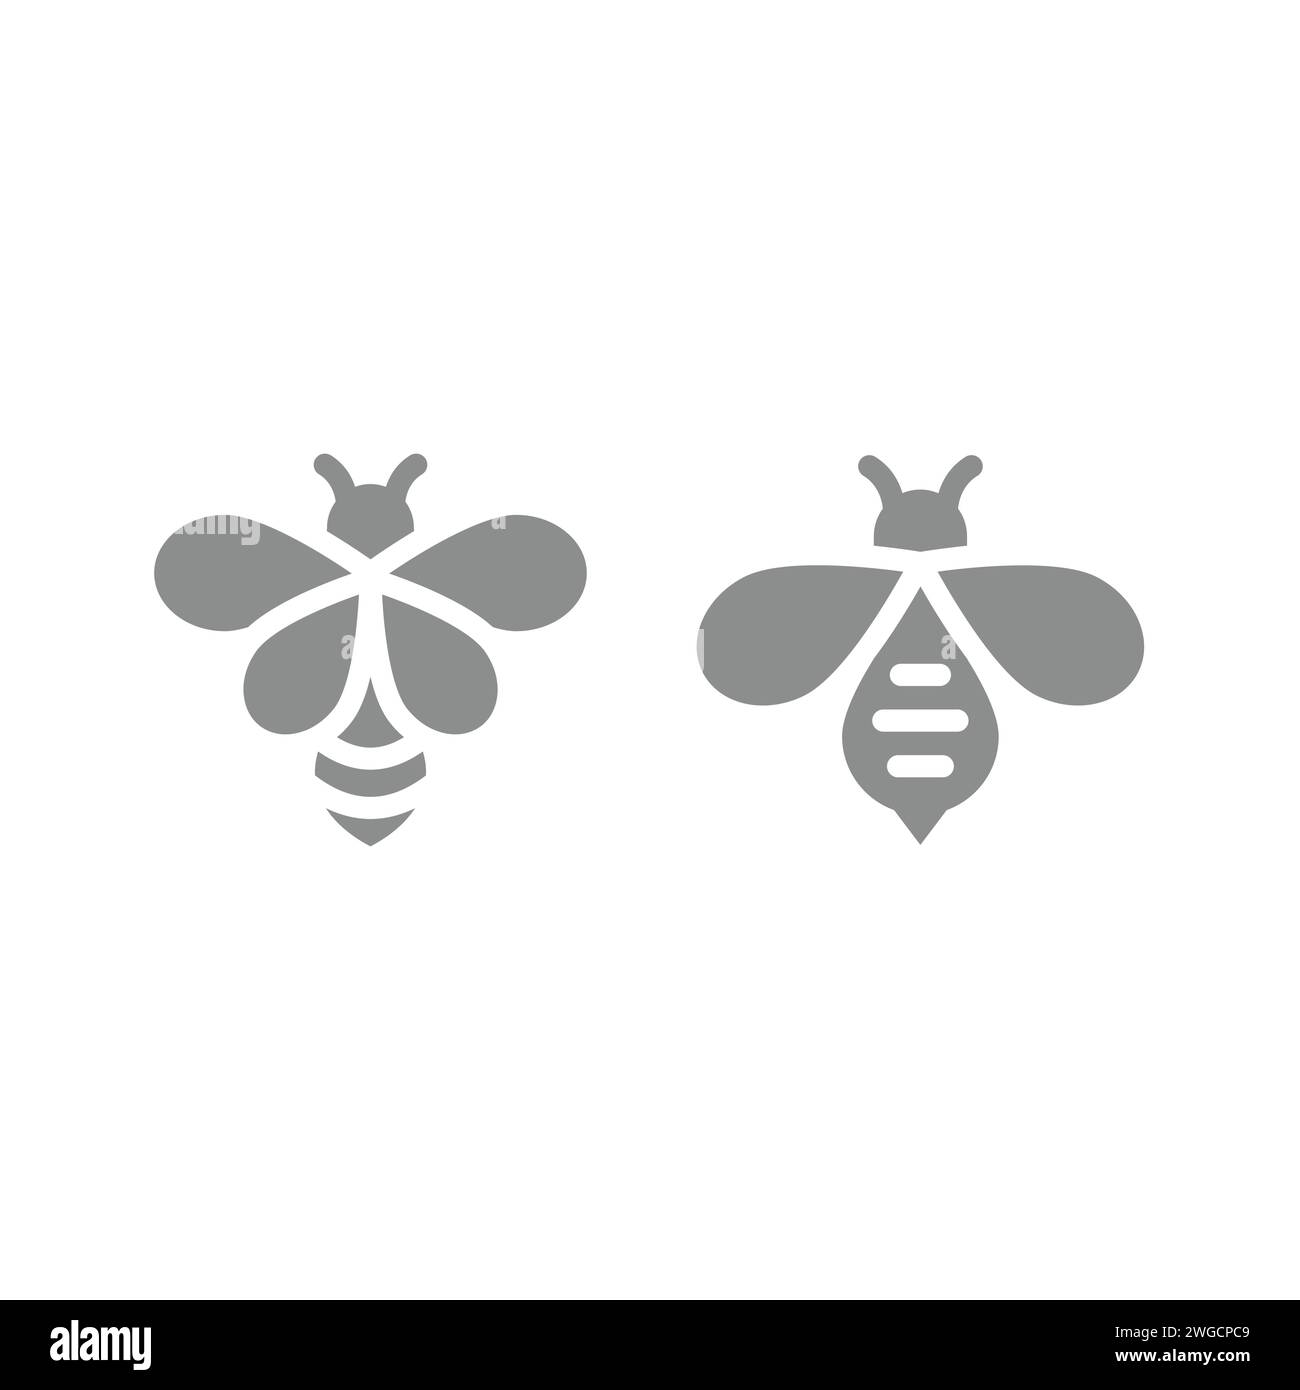 Honey bee vector icon set. Bees black simple icons. Stock Vector